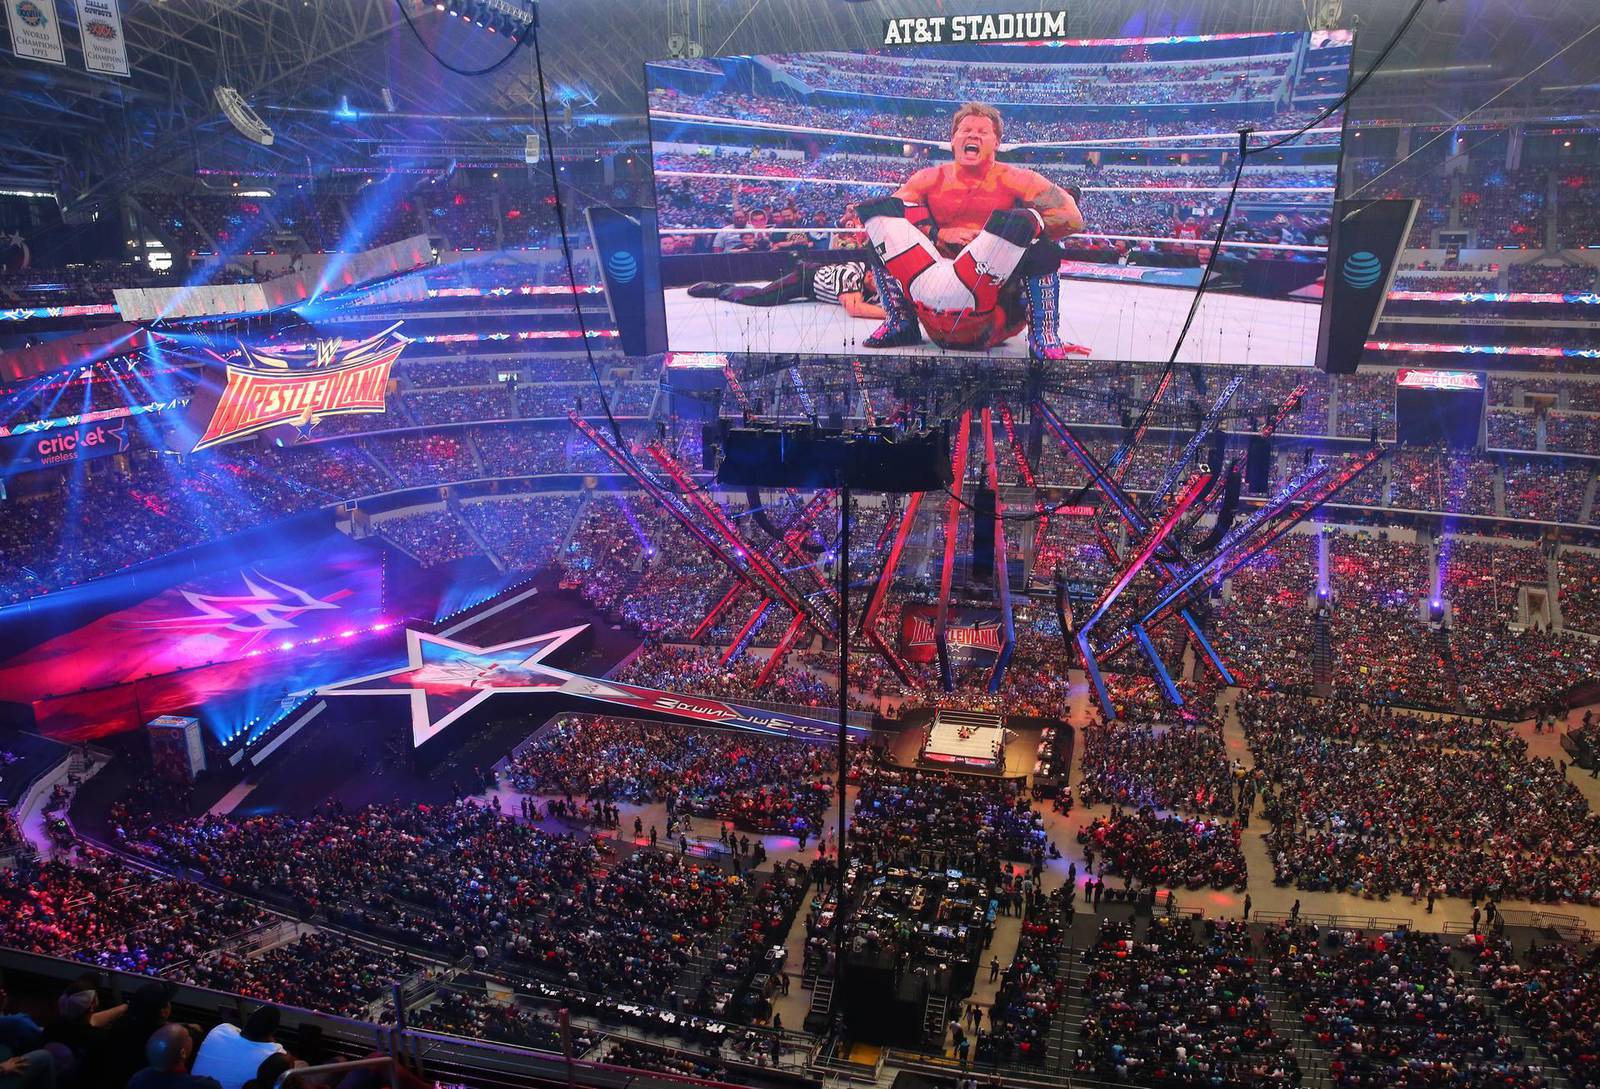 Explainer How did Wrestlemania weekend such a huge event?